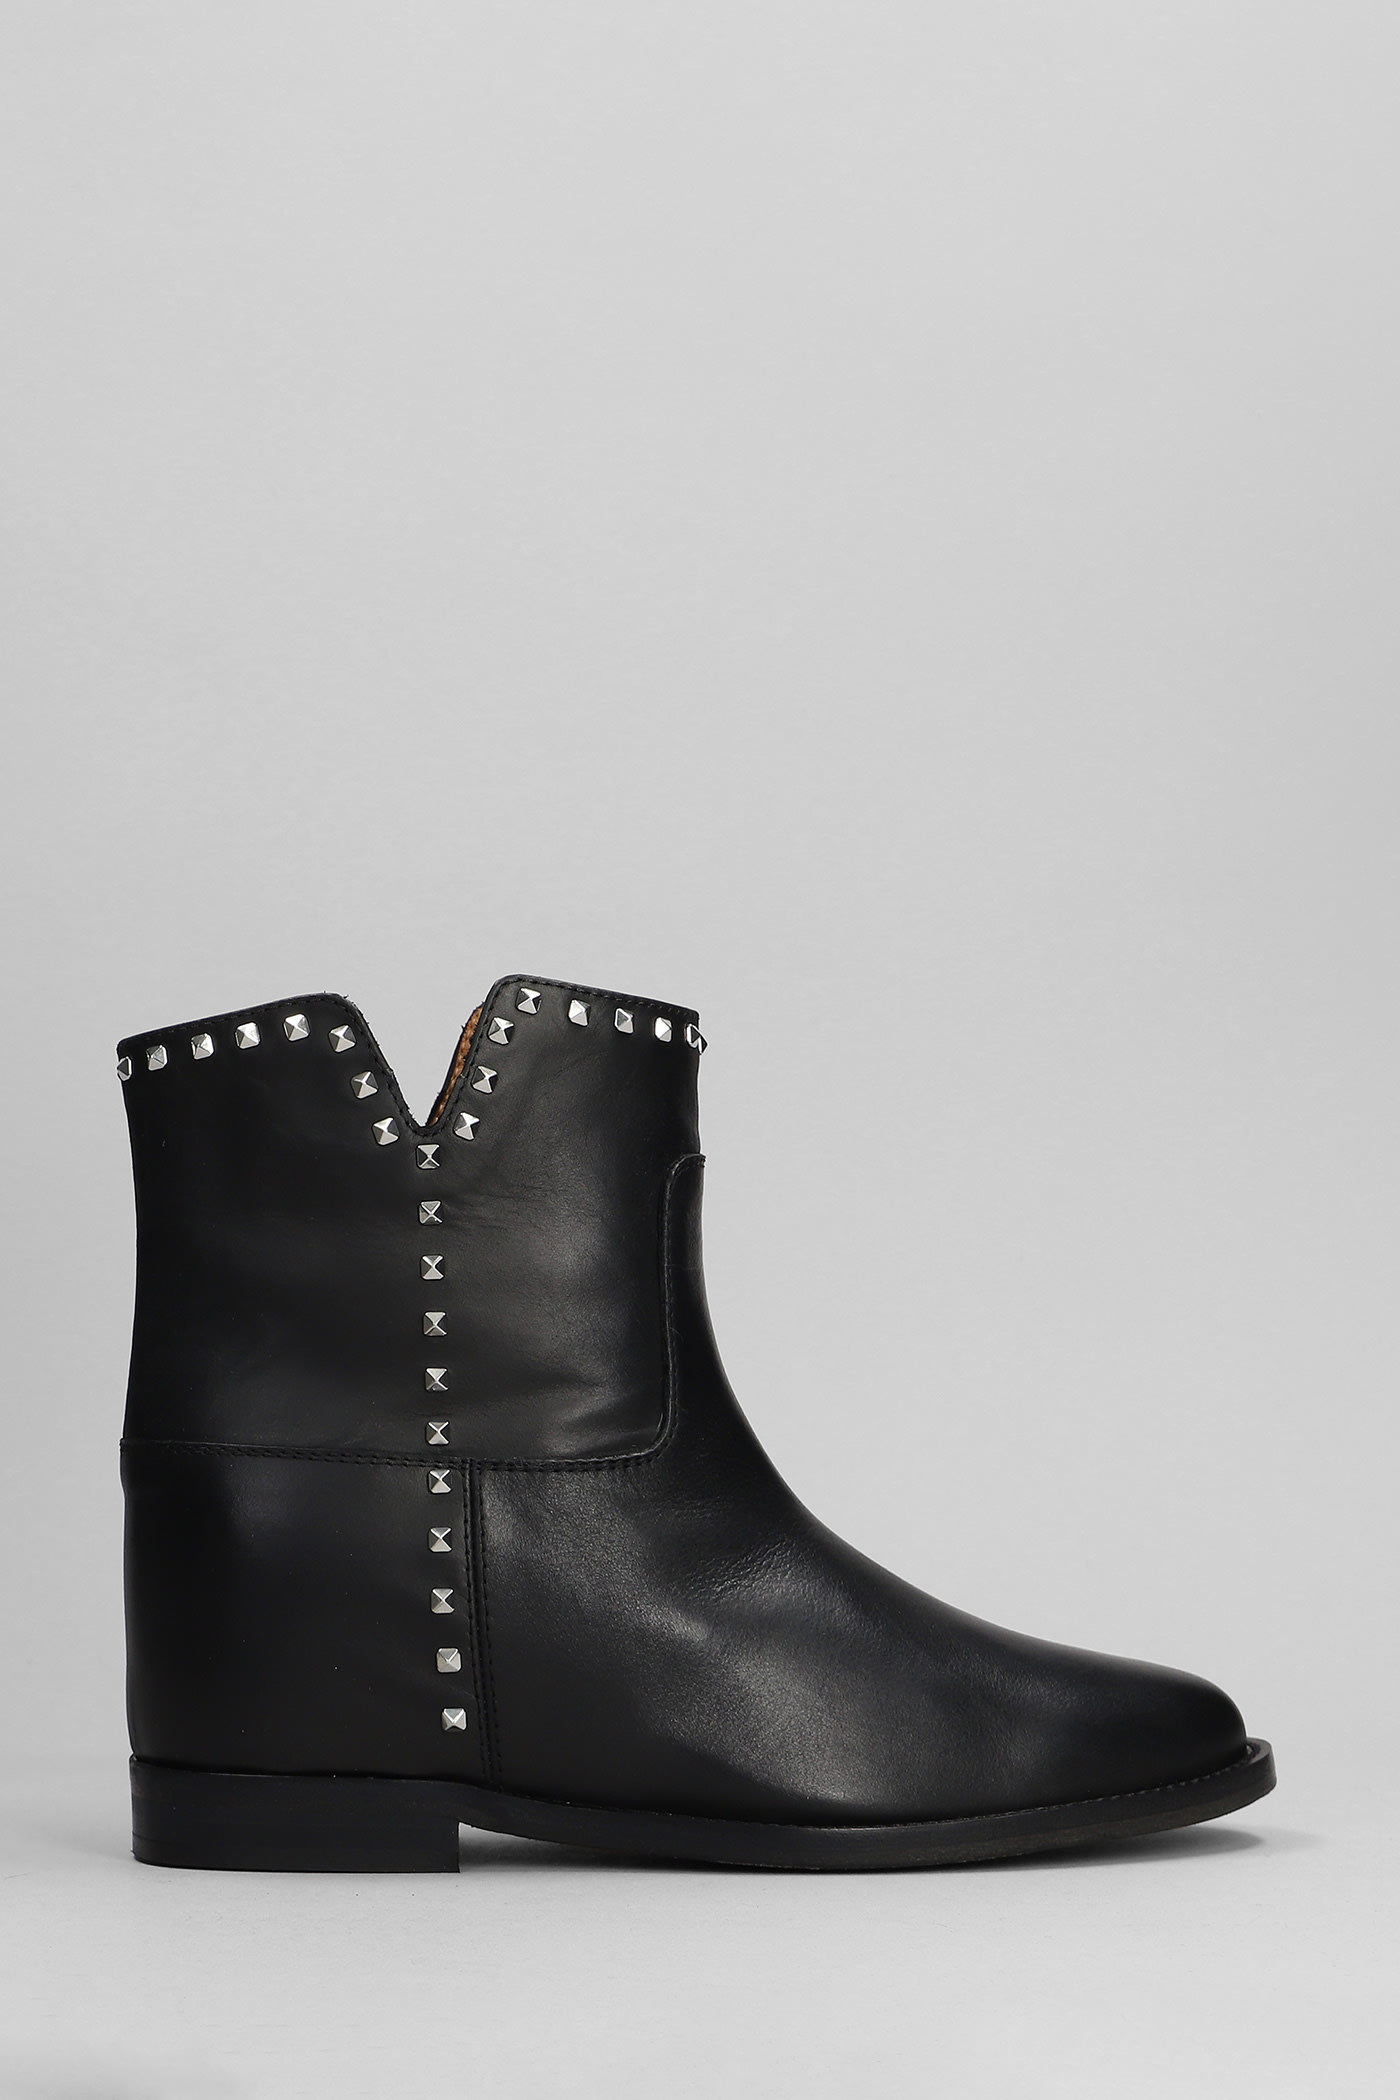 Ankle Boots Inside Wedge In Black Leather